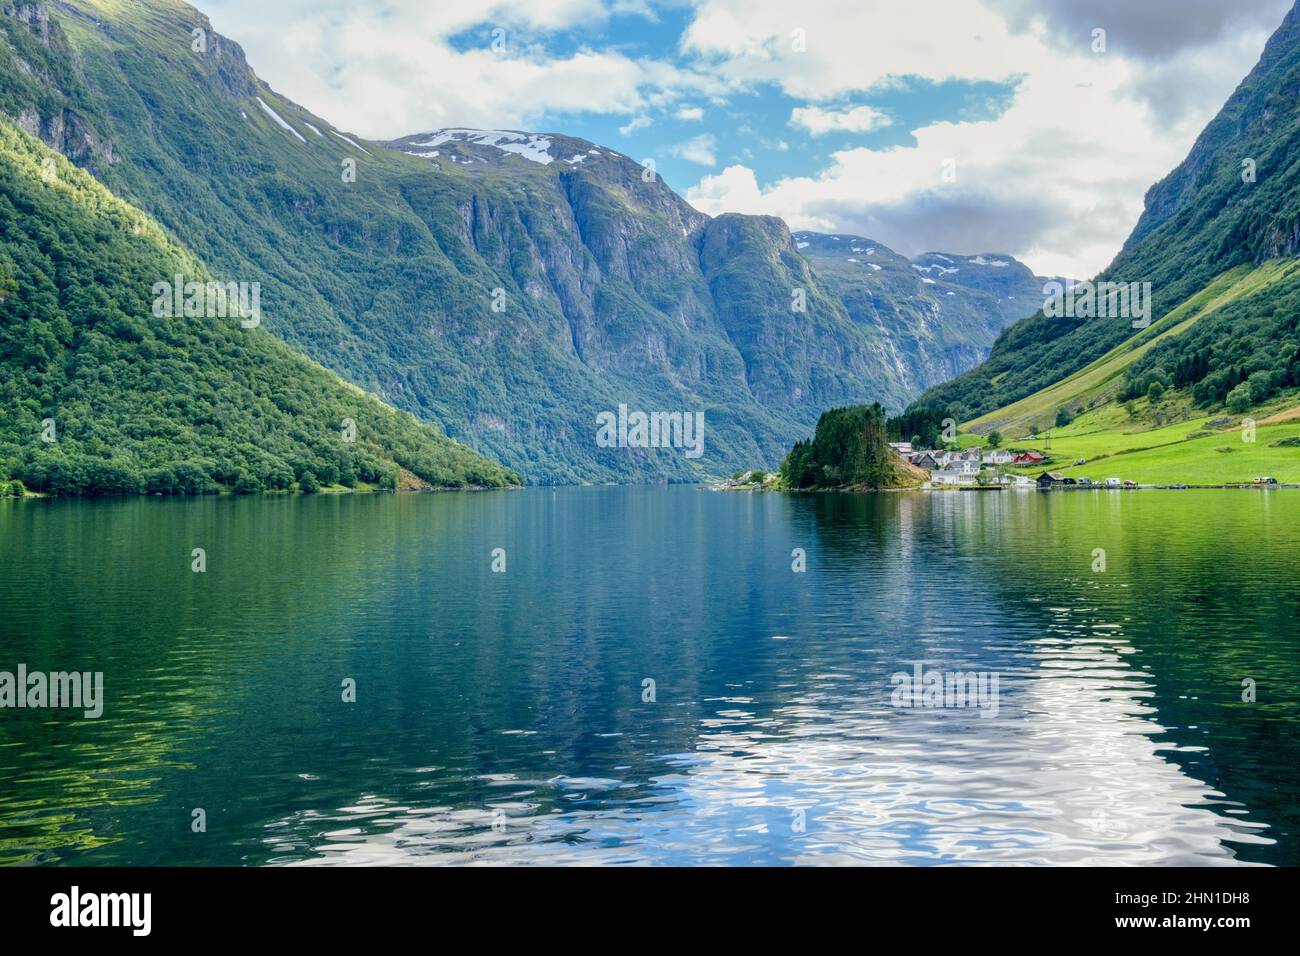 Aurland, Norway. The Nærøyfjord is 17 km long and the narrowest point is only 250 m wide. Daylight shot. Stock Photo